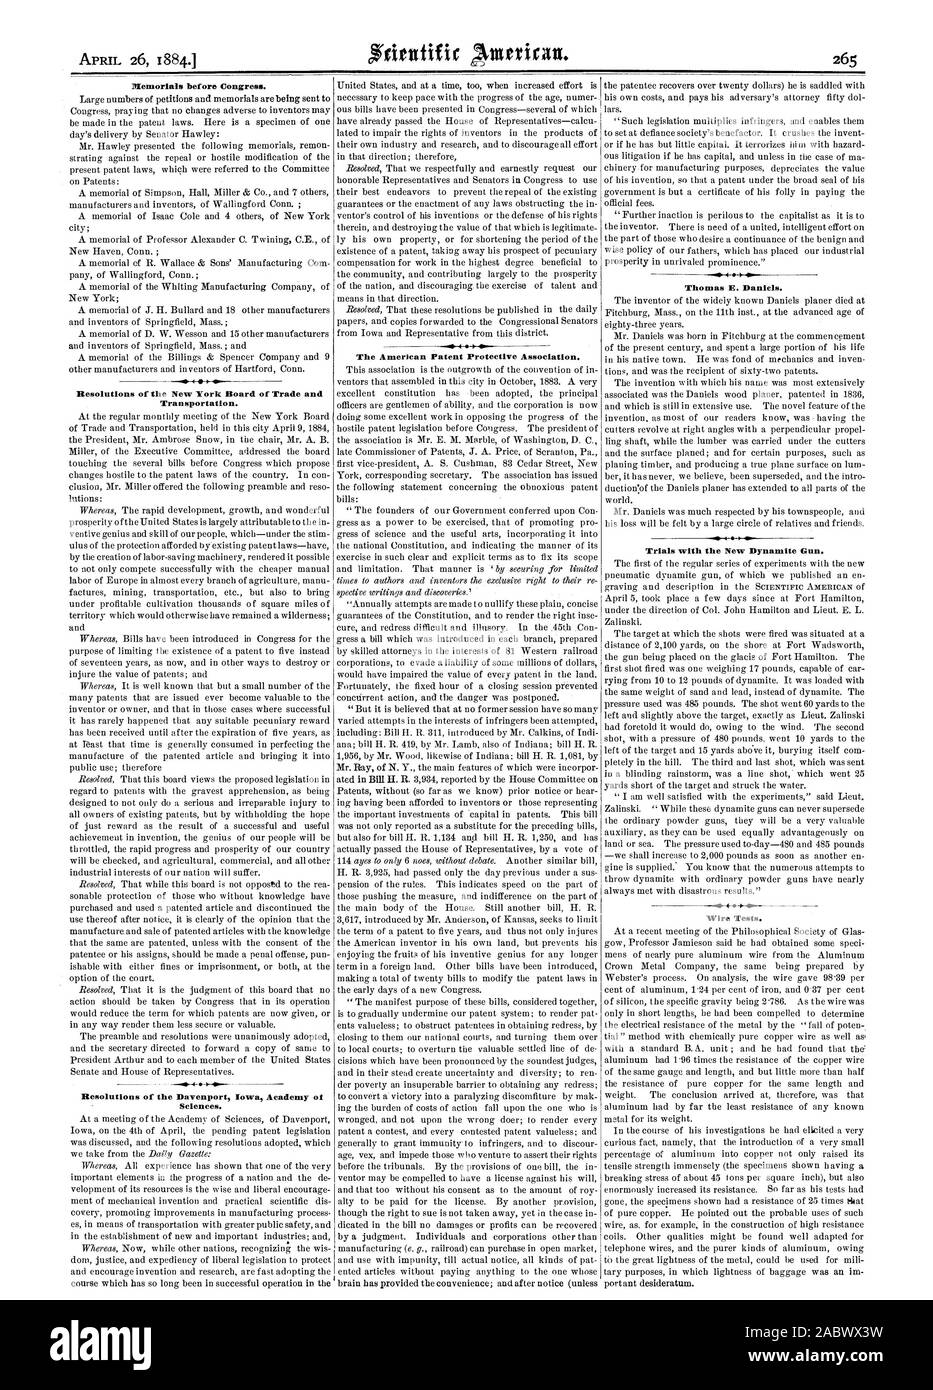 Ix Resolutions of the New York Board of Trade and Transportation. +-41. Resolutions of the Davenport Iowa Academy of Sciences. The American Patent Protective Association. Thomas E. Daniels. Trials with the New Dynamite Gun. Wire Tests., scientific american, 1884-04-26 Stock Photo